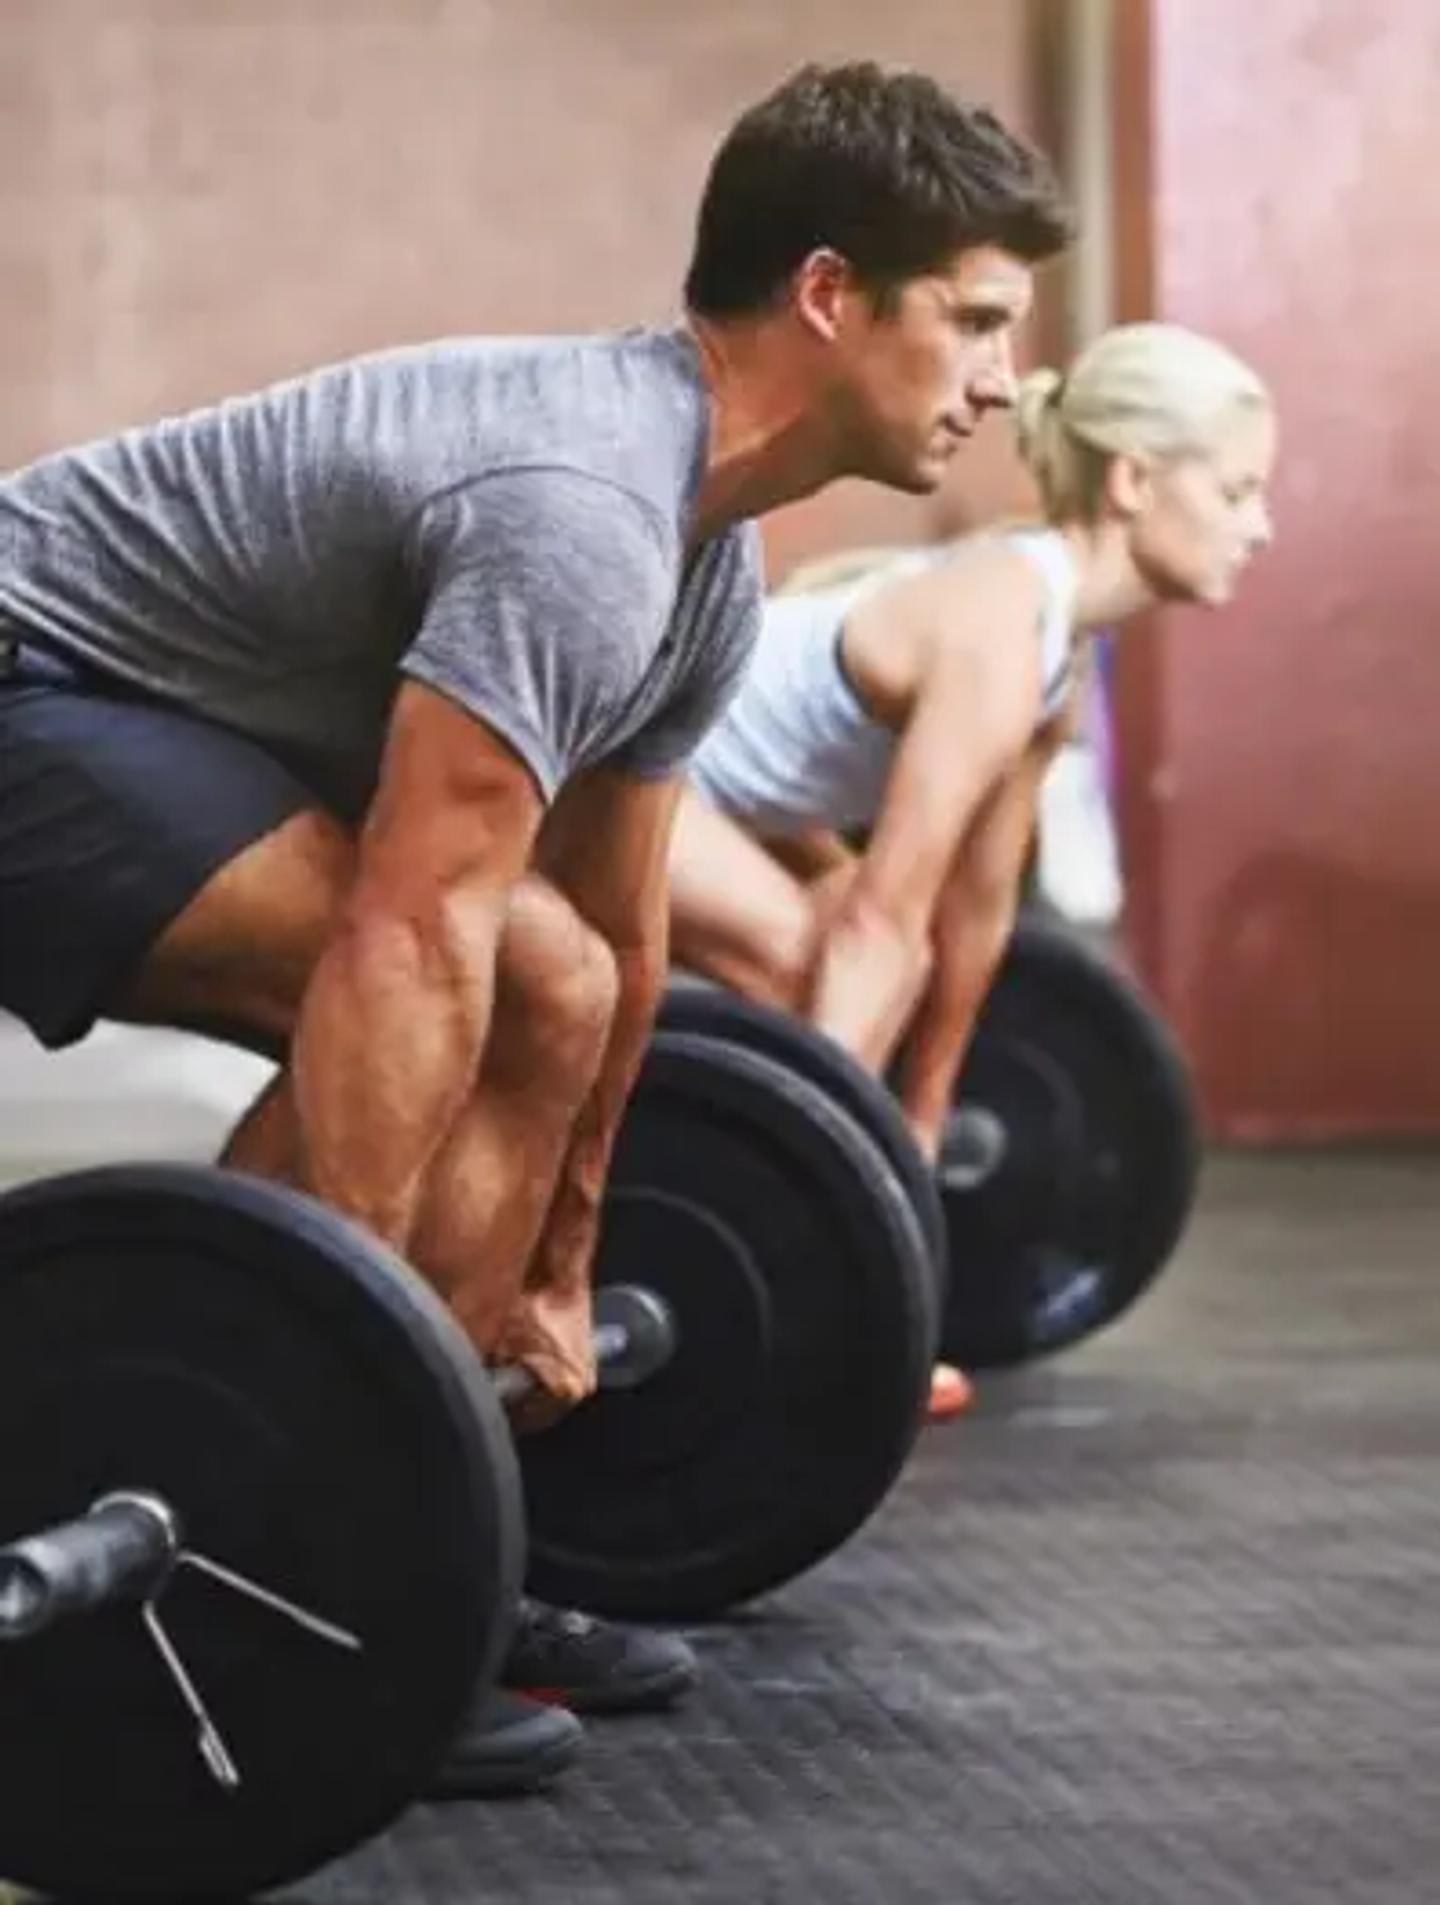 A man and a woman deadlifting